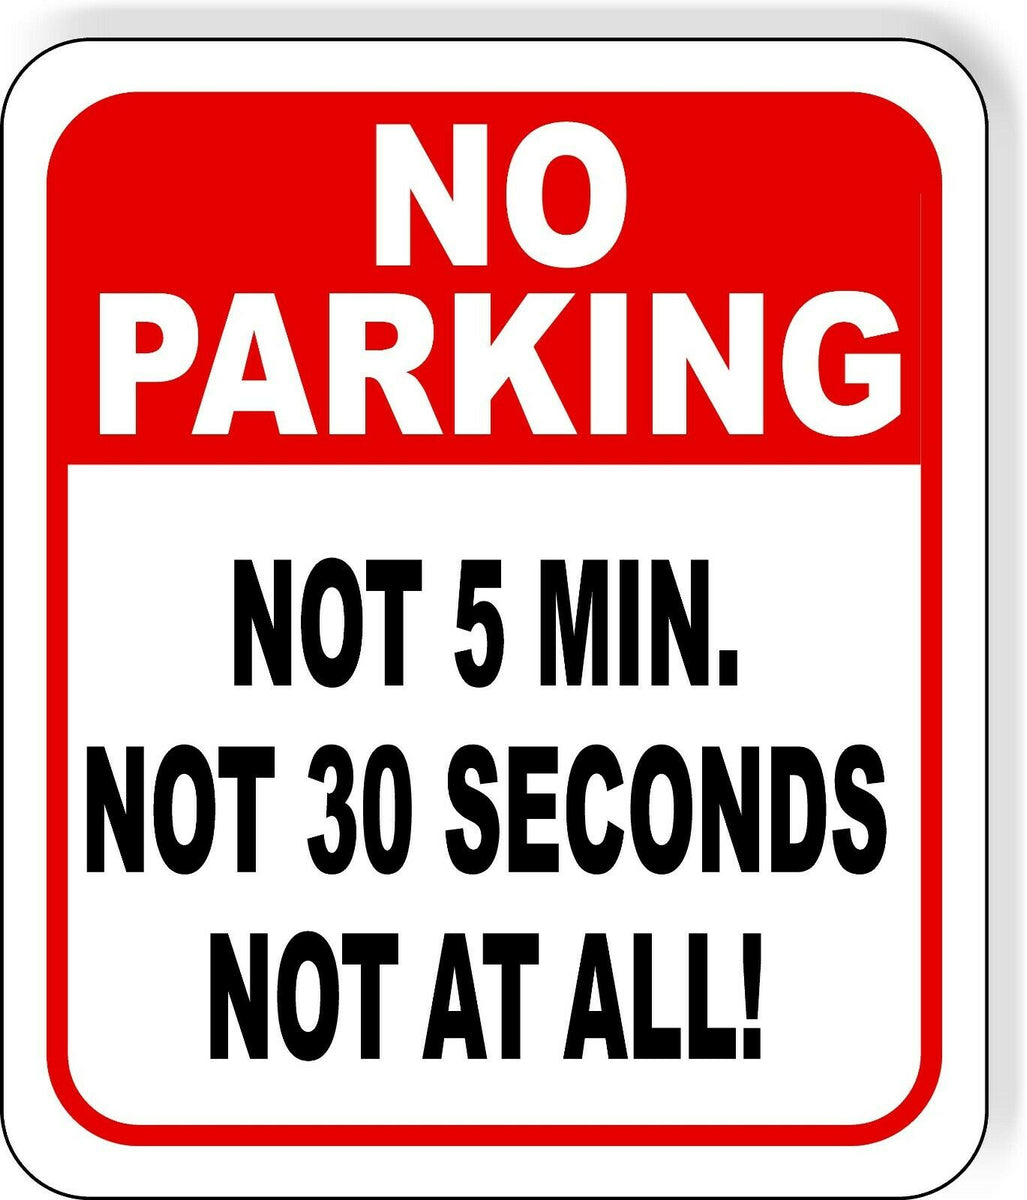 No Parking FUNNY NOT 5 MIN NOT 30 SECONDS NOT AT ALL metal outdoor sign